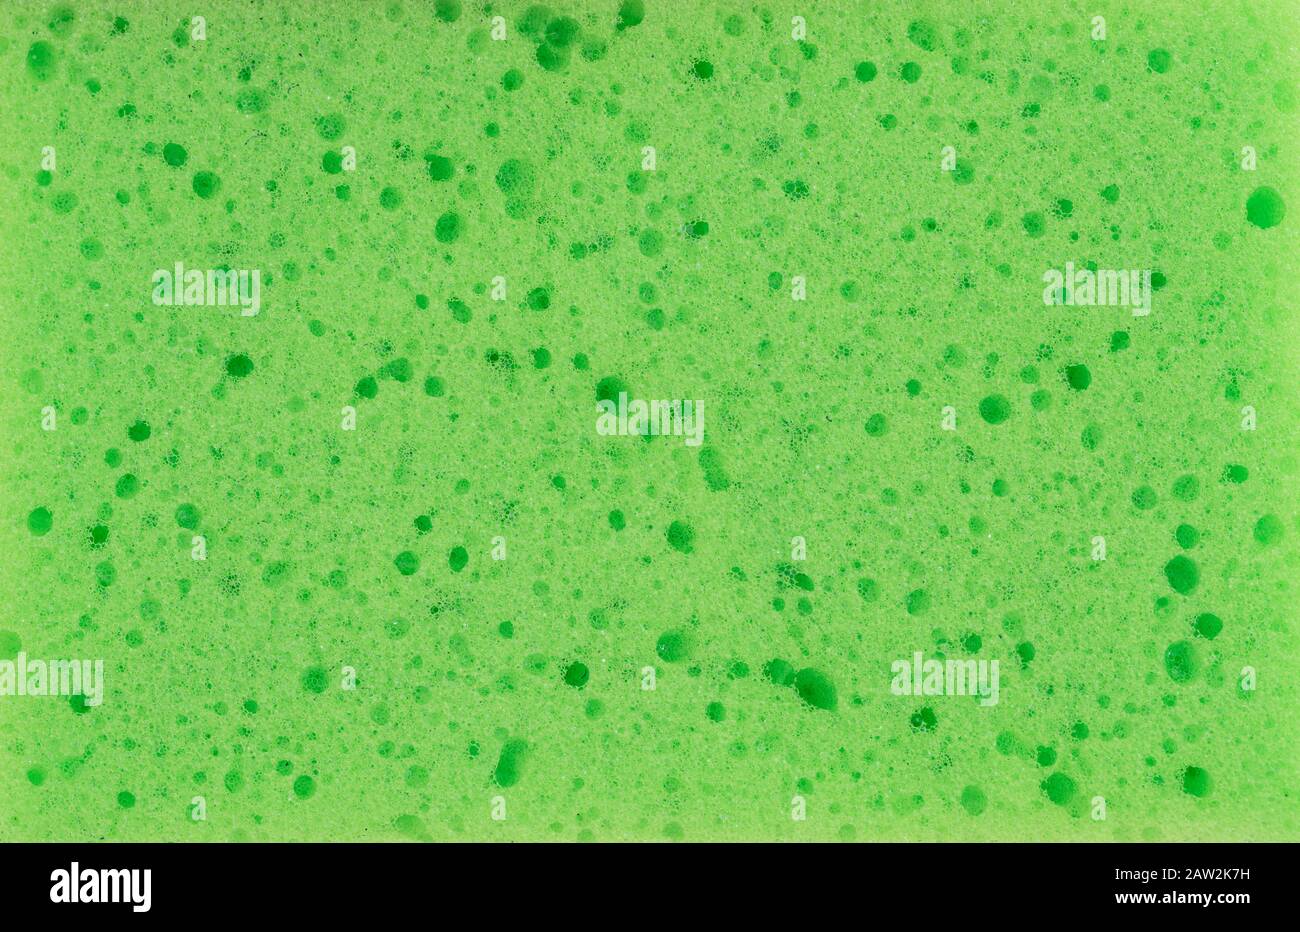 Sponge texture background. Green color cleaning sponge material detail close up view. Dish washing or beauty care. Macro Stock Photo